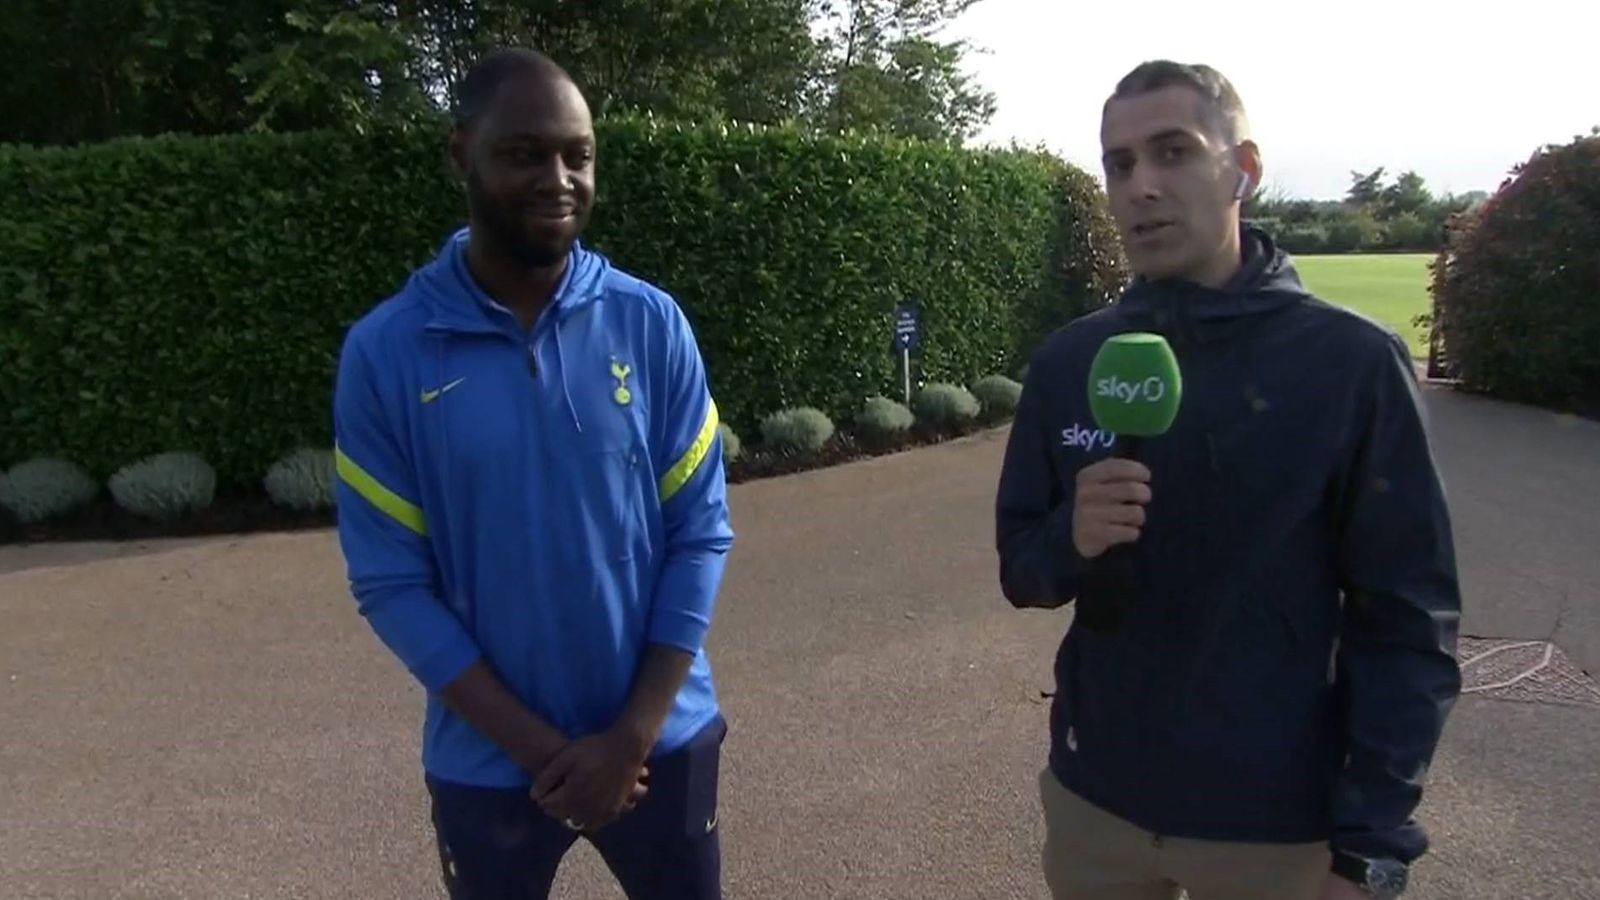 Summer of Sustainability: Ledley King shows Sky Sports why ...